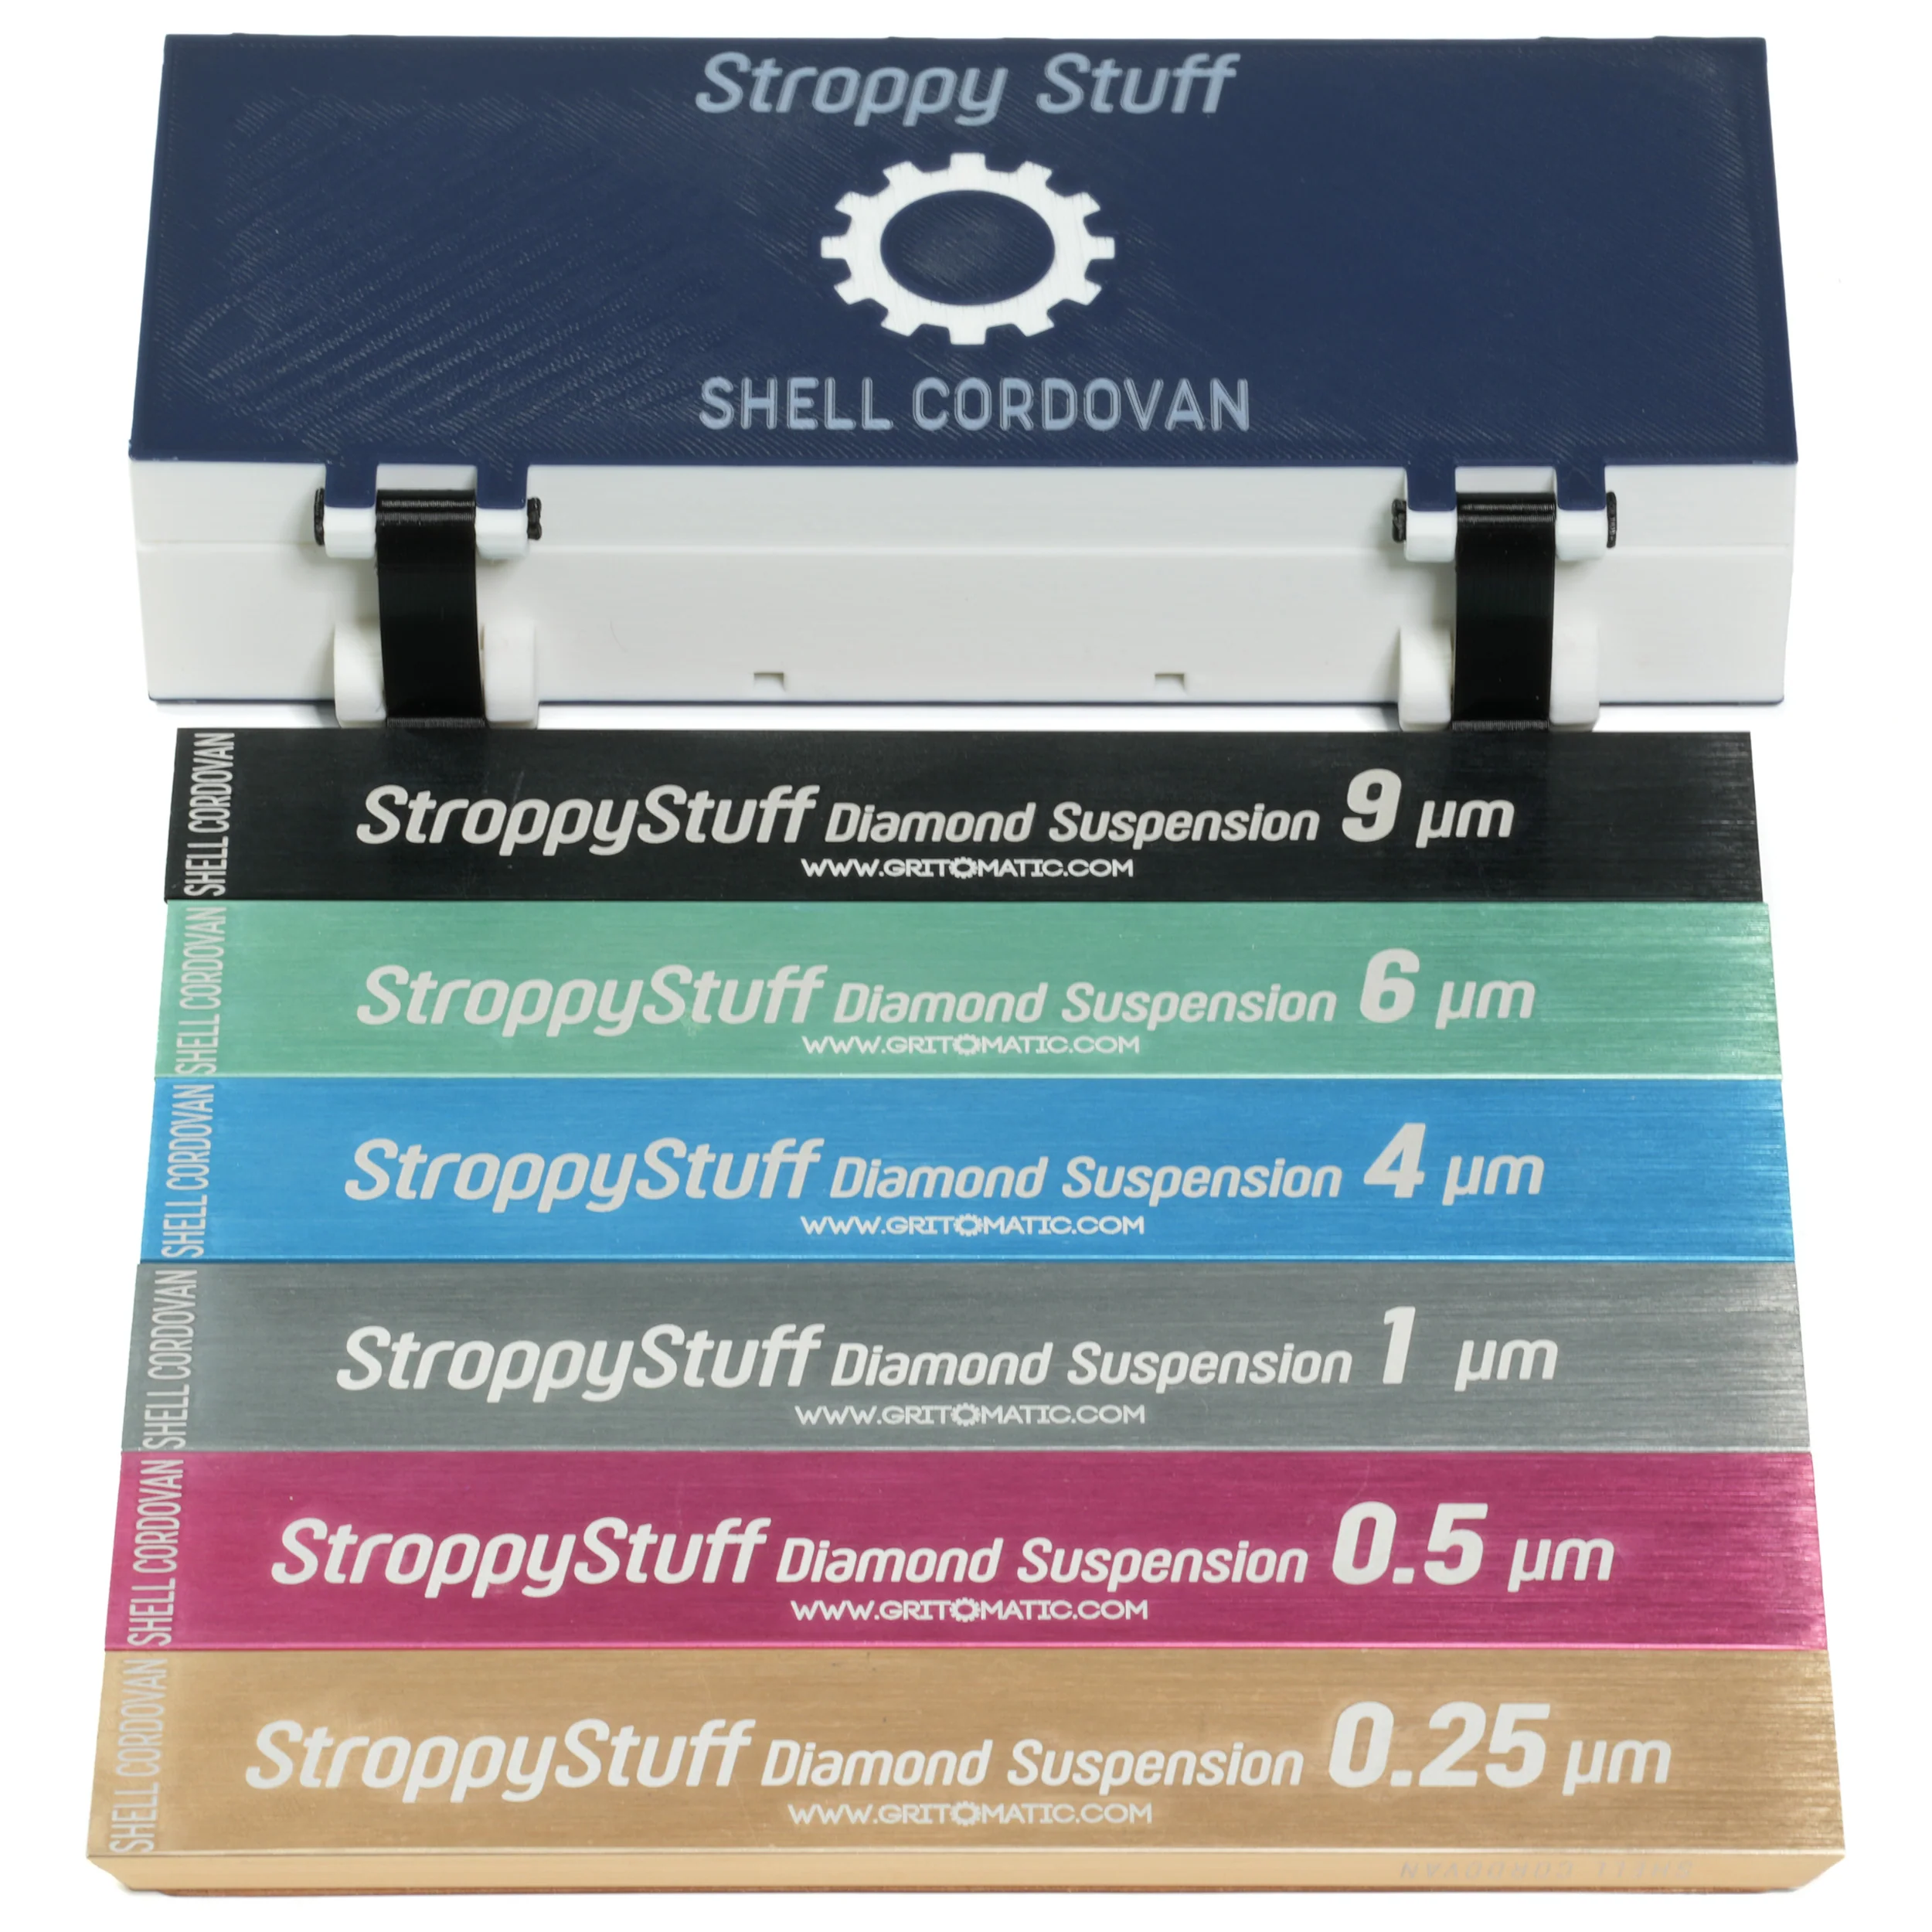 Multi-Color Strop Set - Shell Cordovan Leather for Stroppy Stuff (6) [6" x 1"] Questions & Answers